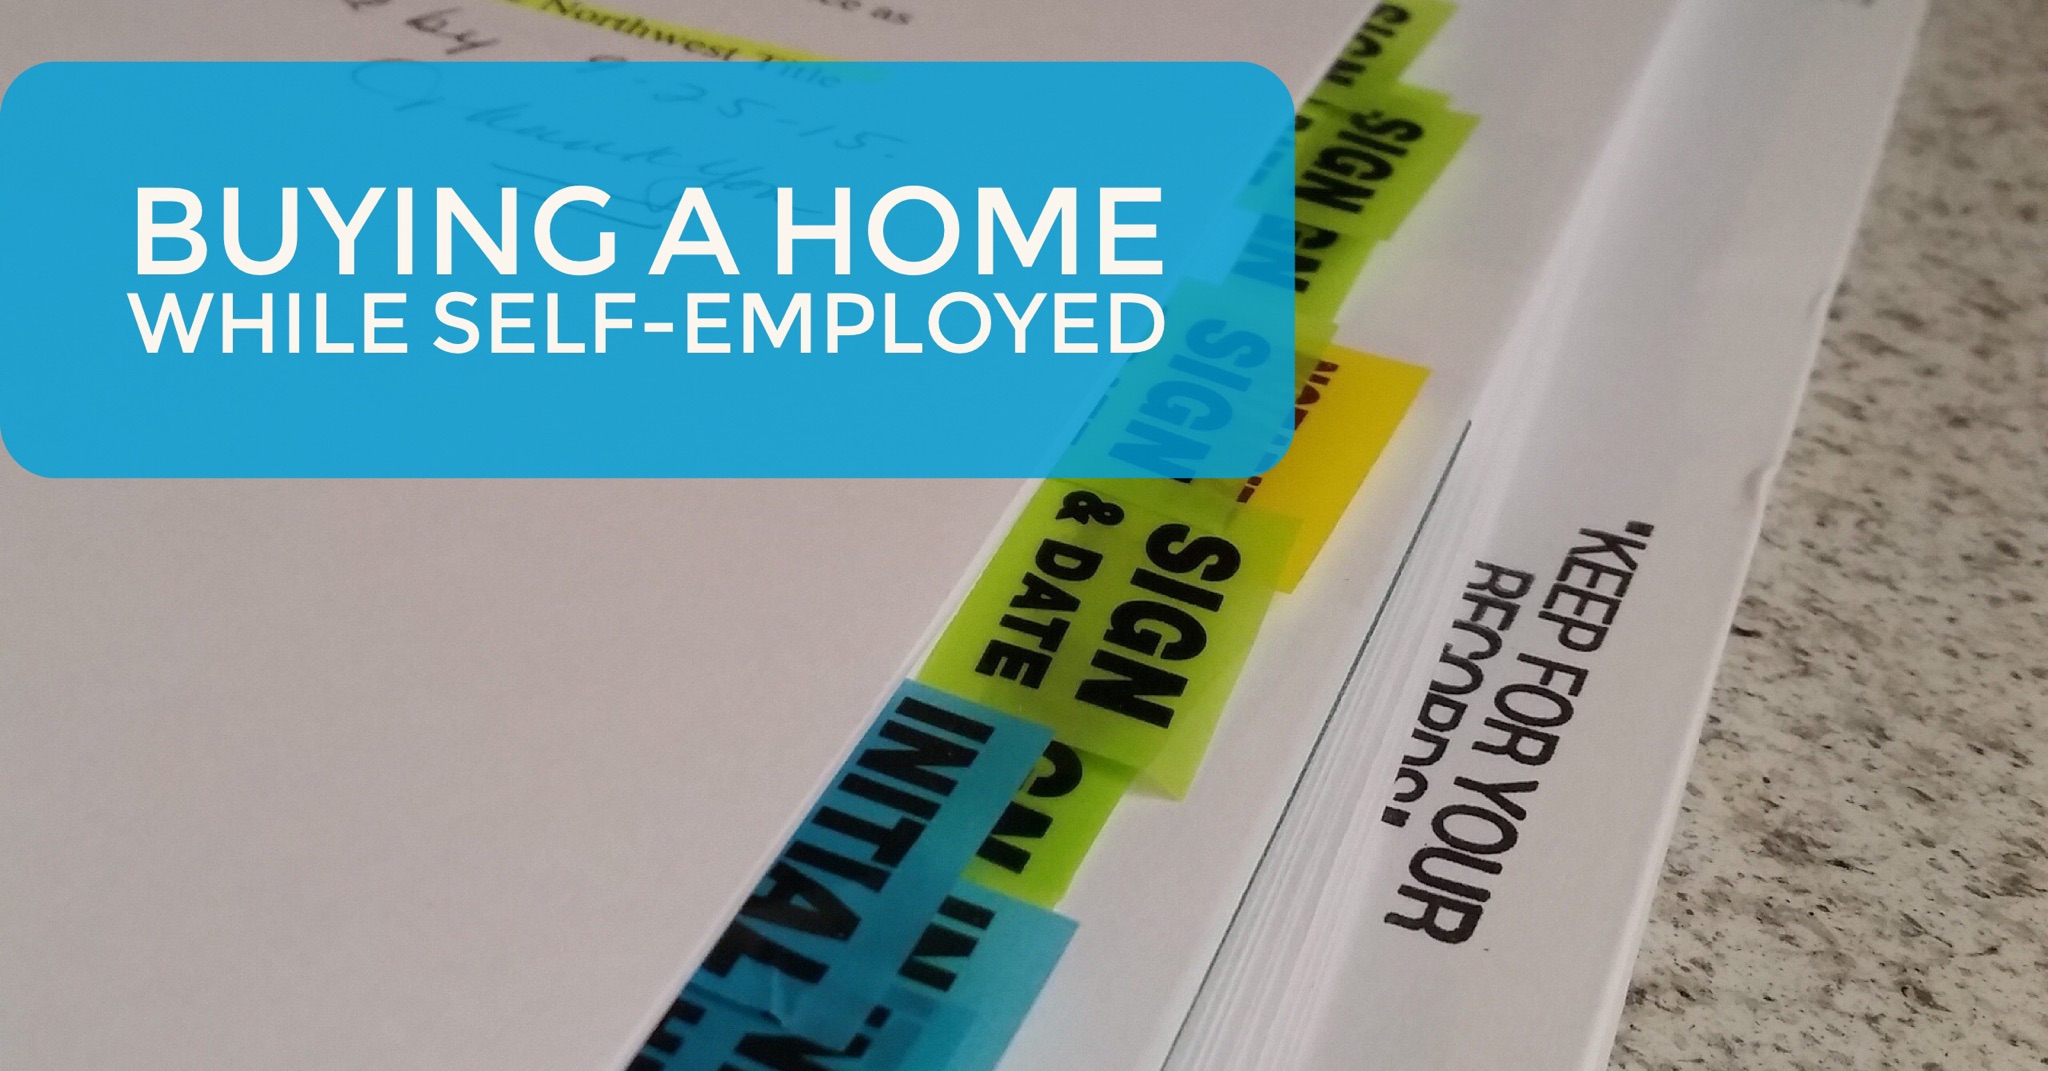 How To Buy Your First Home While Self-Employed